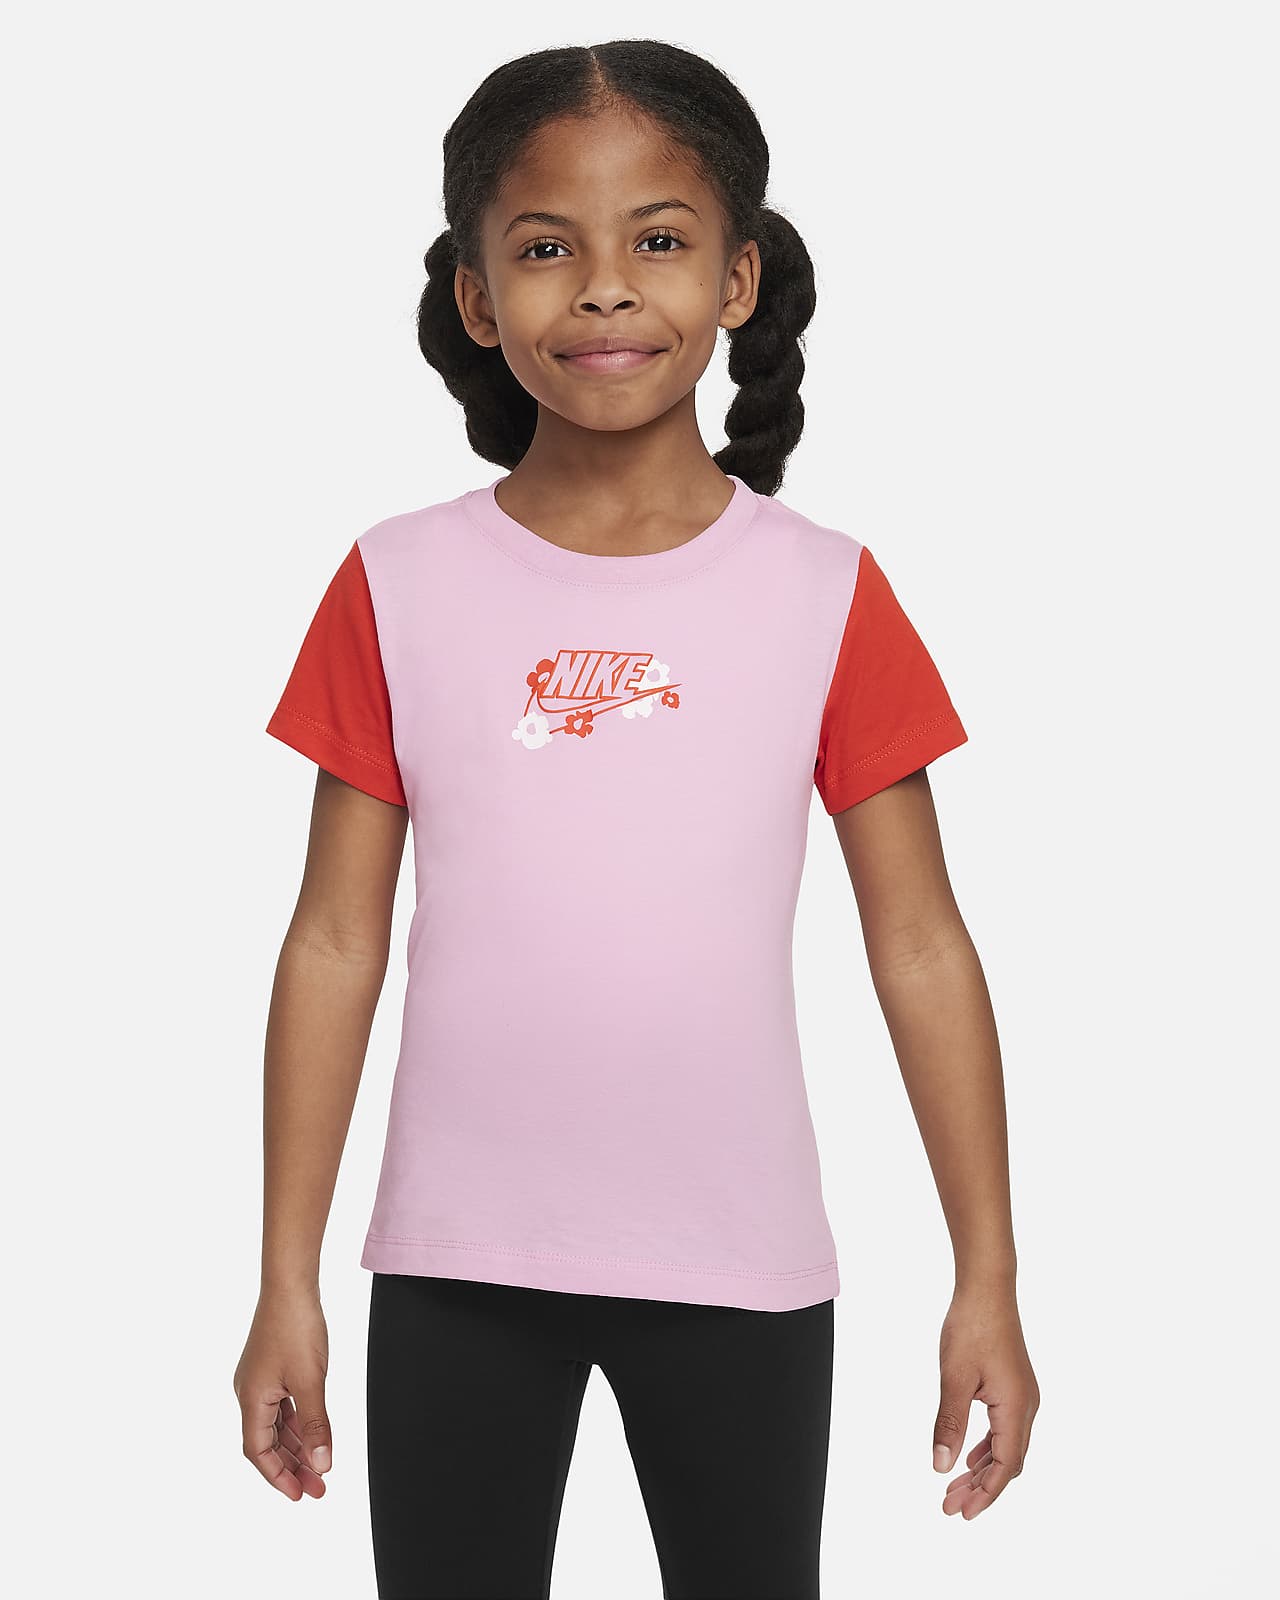 Nike "Your Move" Little Kids' Graphic T-Shirt